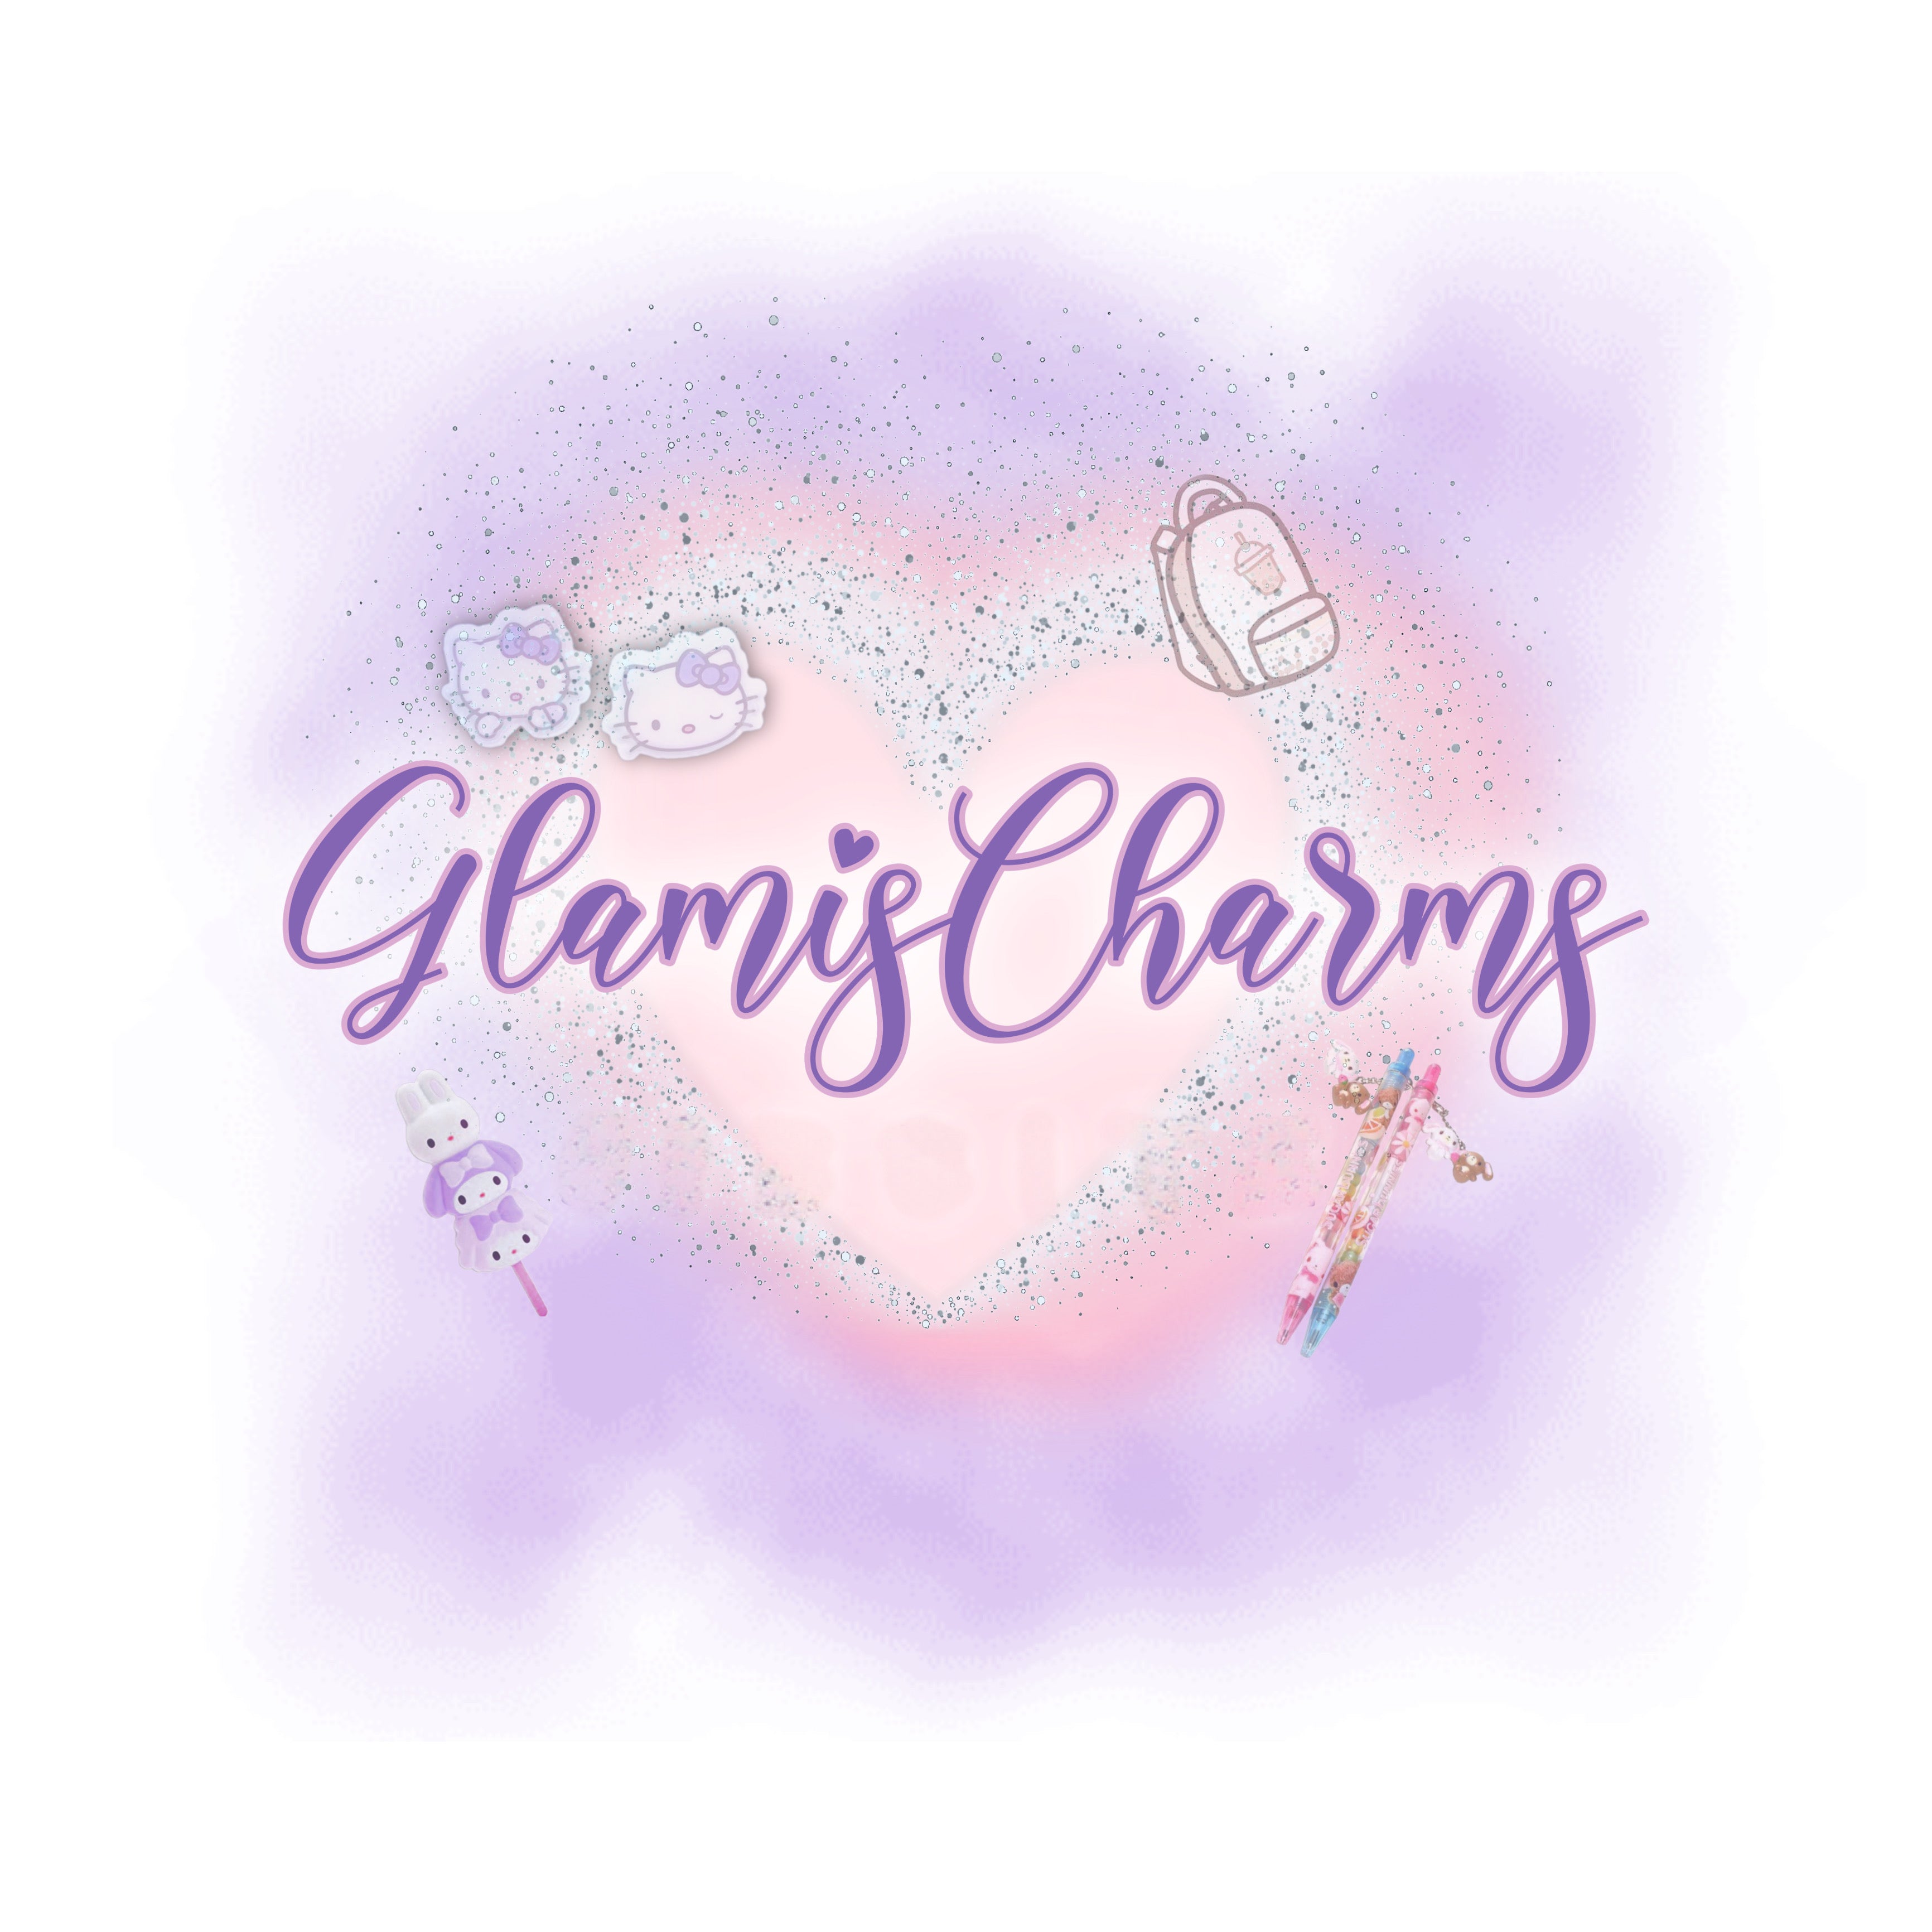 Glamischarms